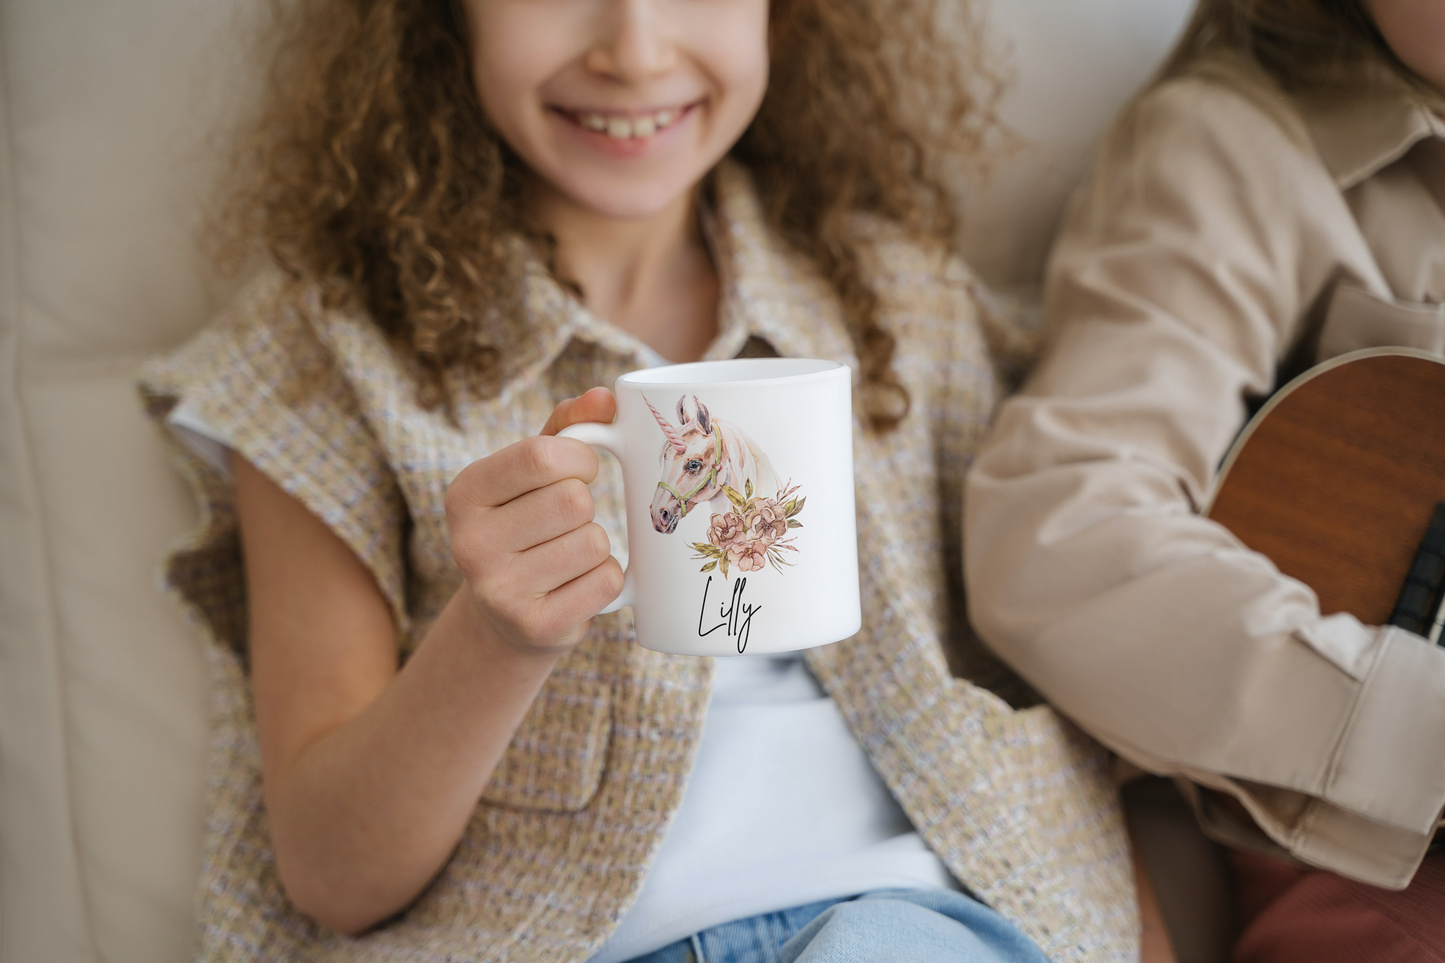 Super nice cup in a unicorn design and personalized with a name